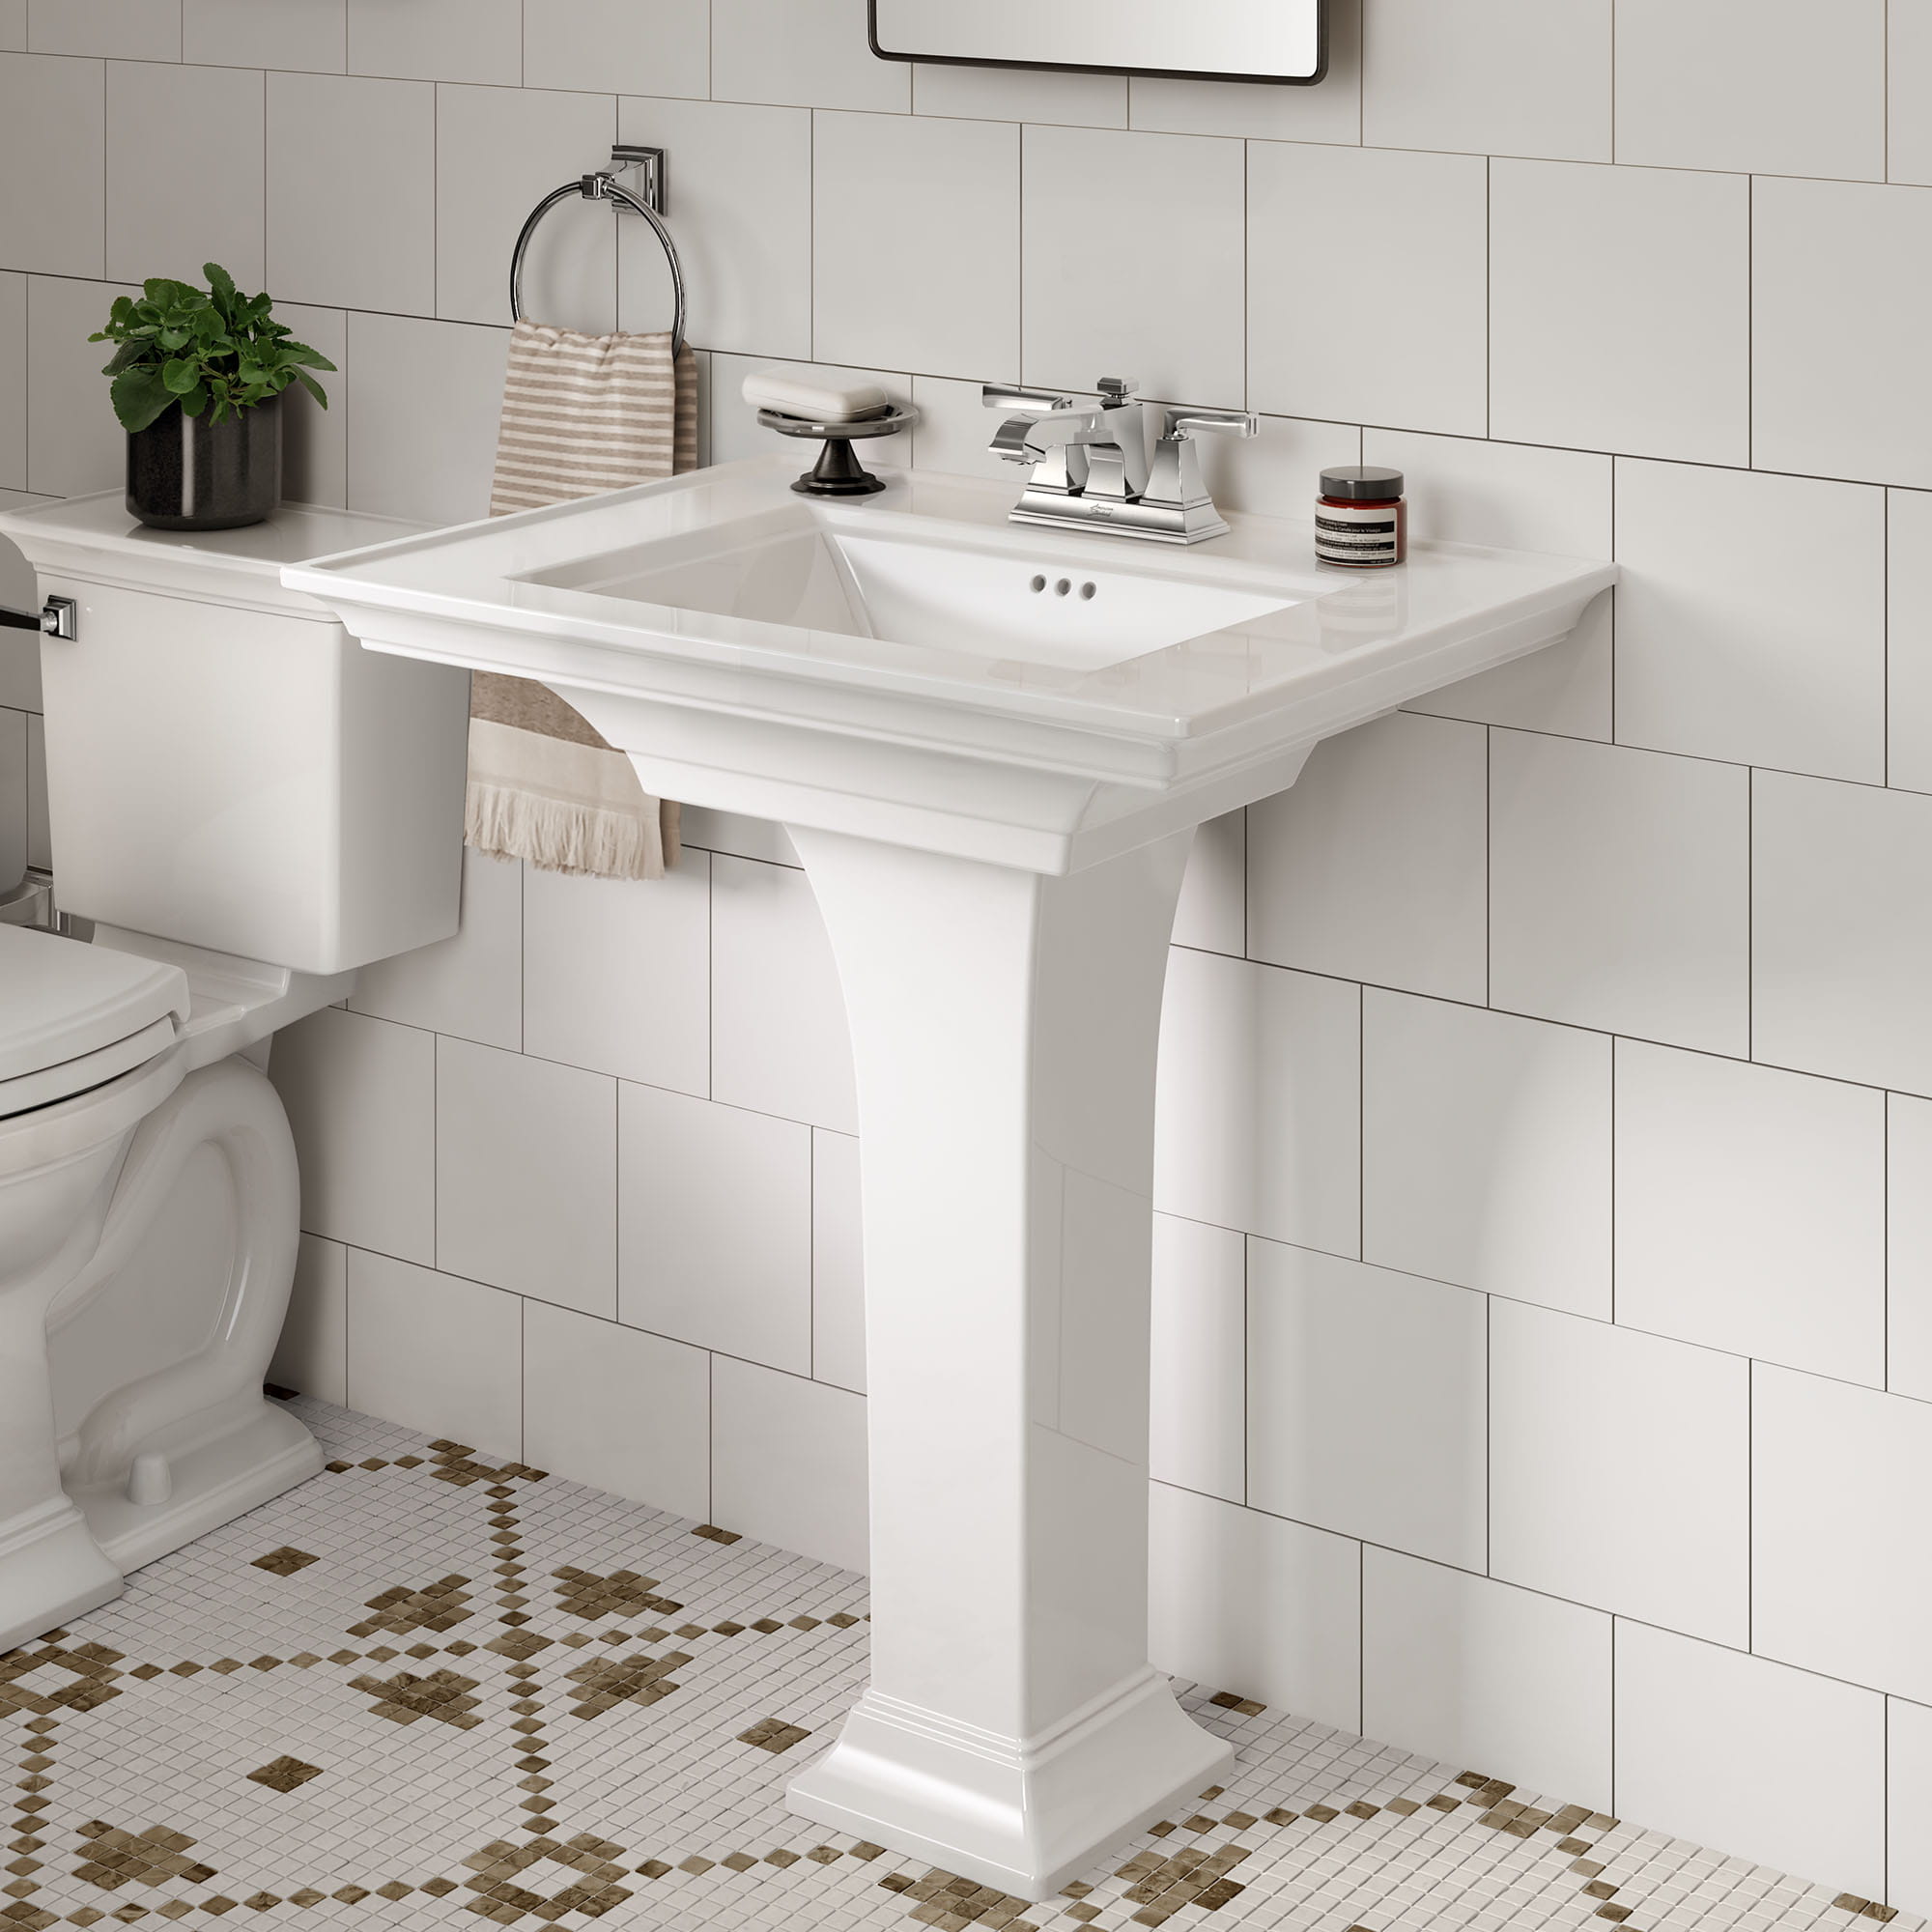 Town Square S 4 Inch Centerset Pedestal Sink Top and Leg Combination WHITE